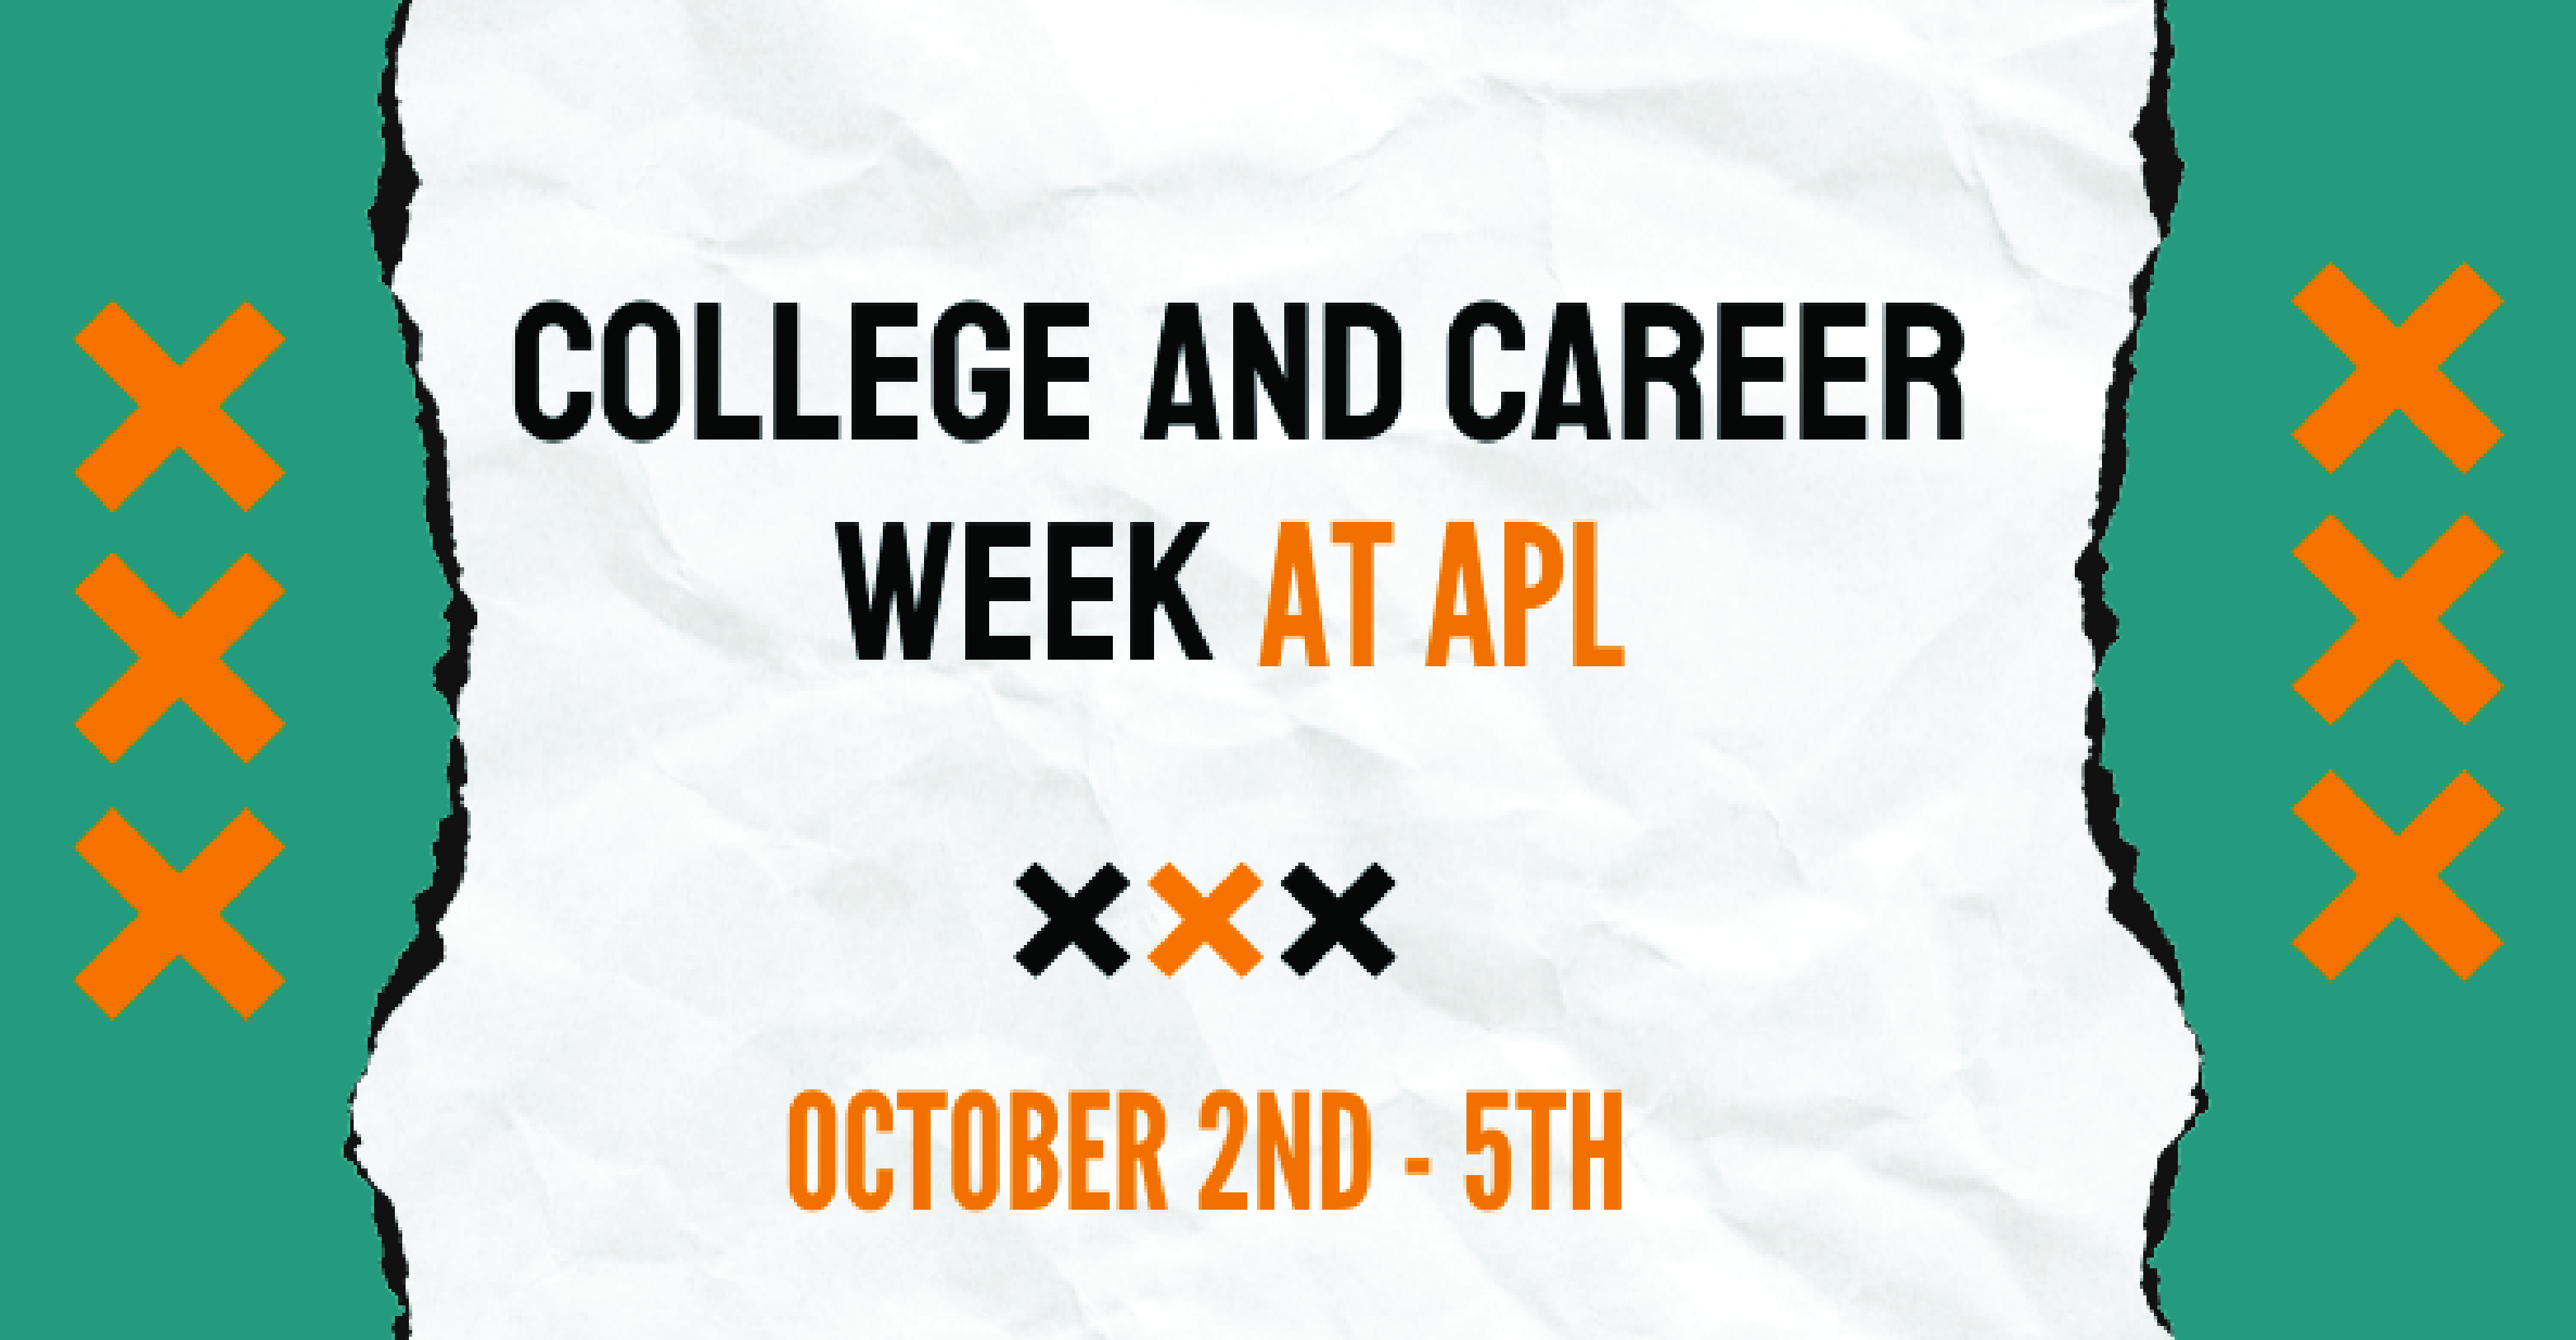 College and Career Week at APL Oct. 2nd-5th 